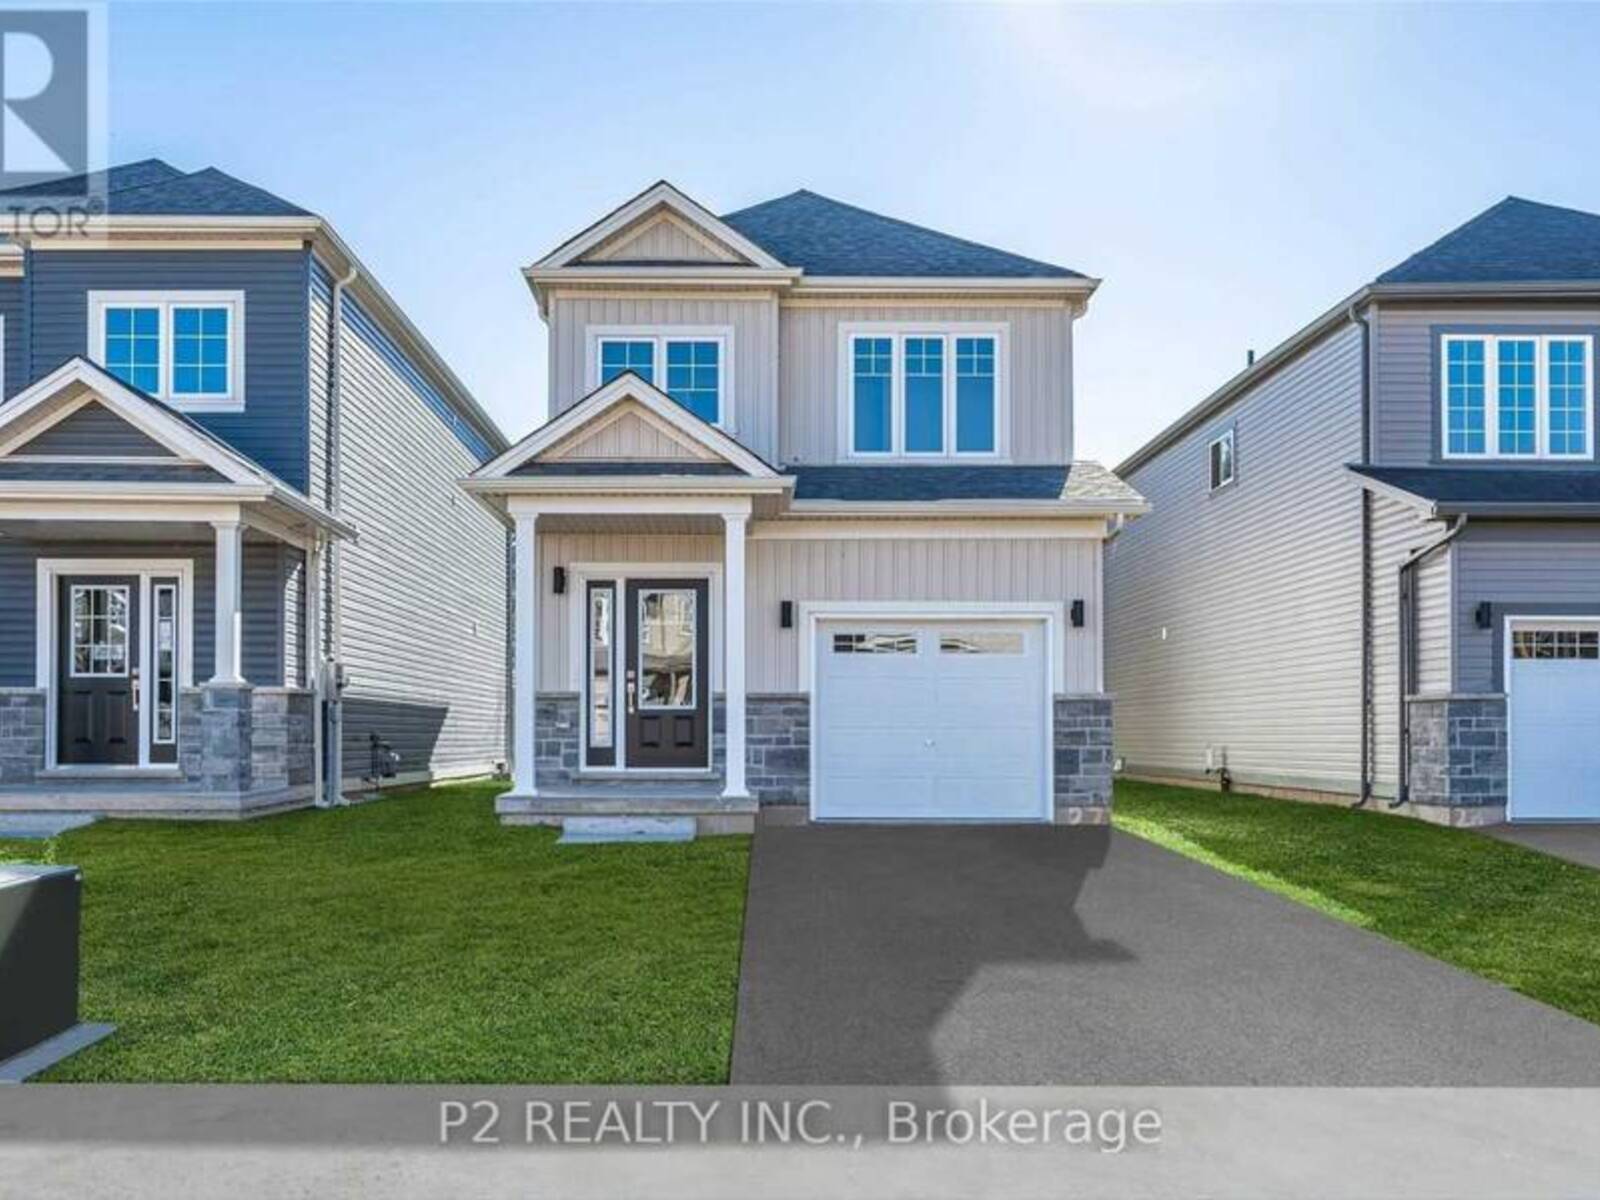 29 BROMLEY DRIVE, St. Catharines, Ontario L2M 1R1